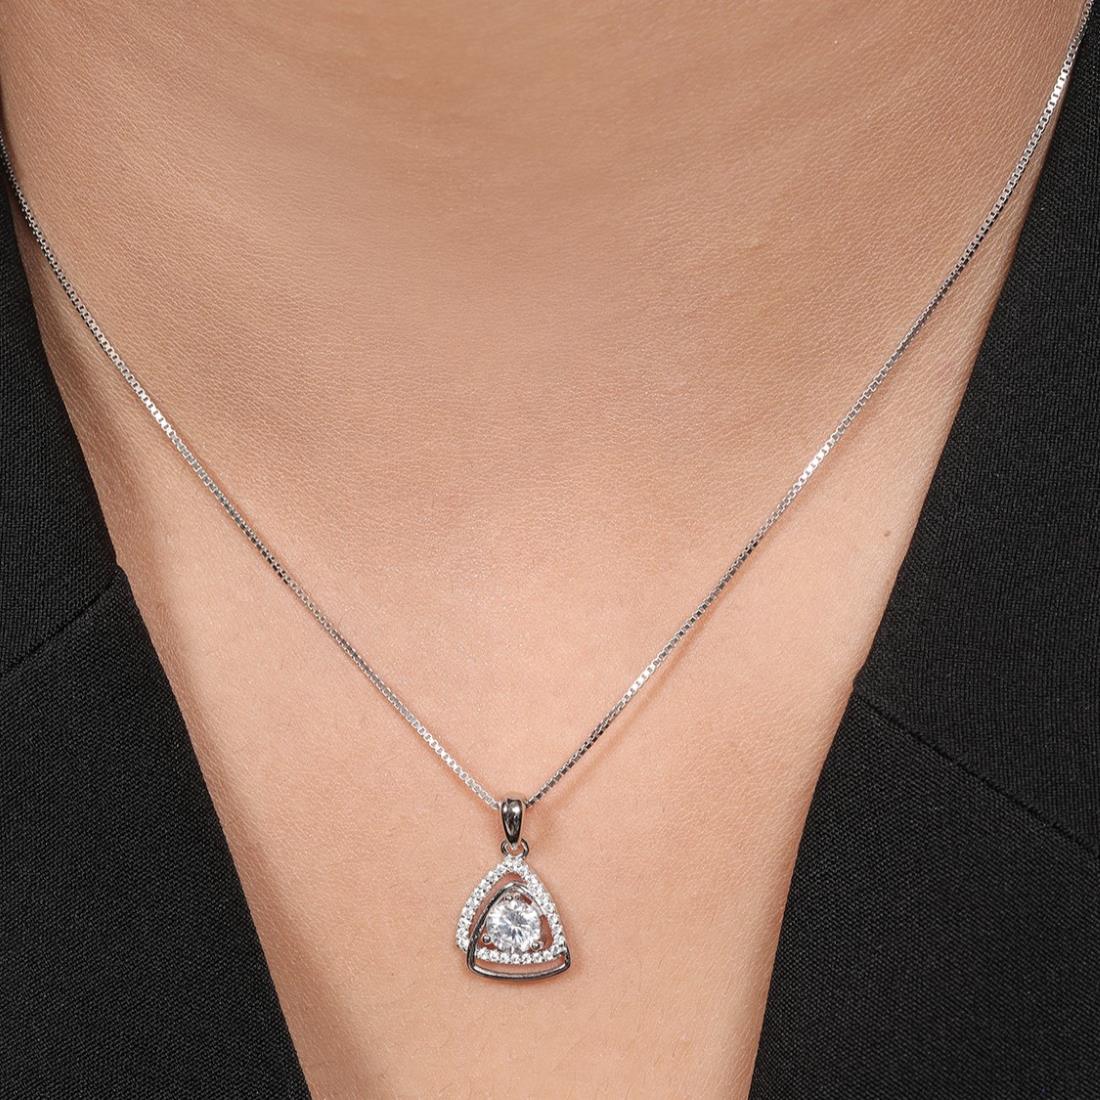 Triangle Sparkle Rhodium Plated 925 Sterling Silver Pendant